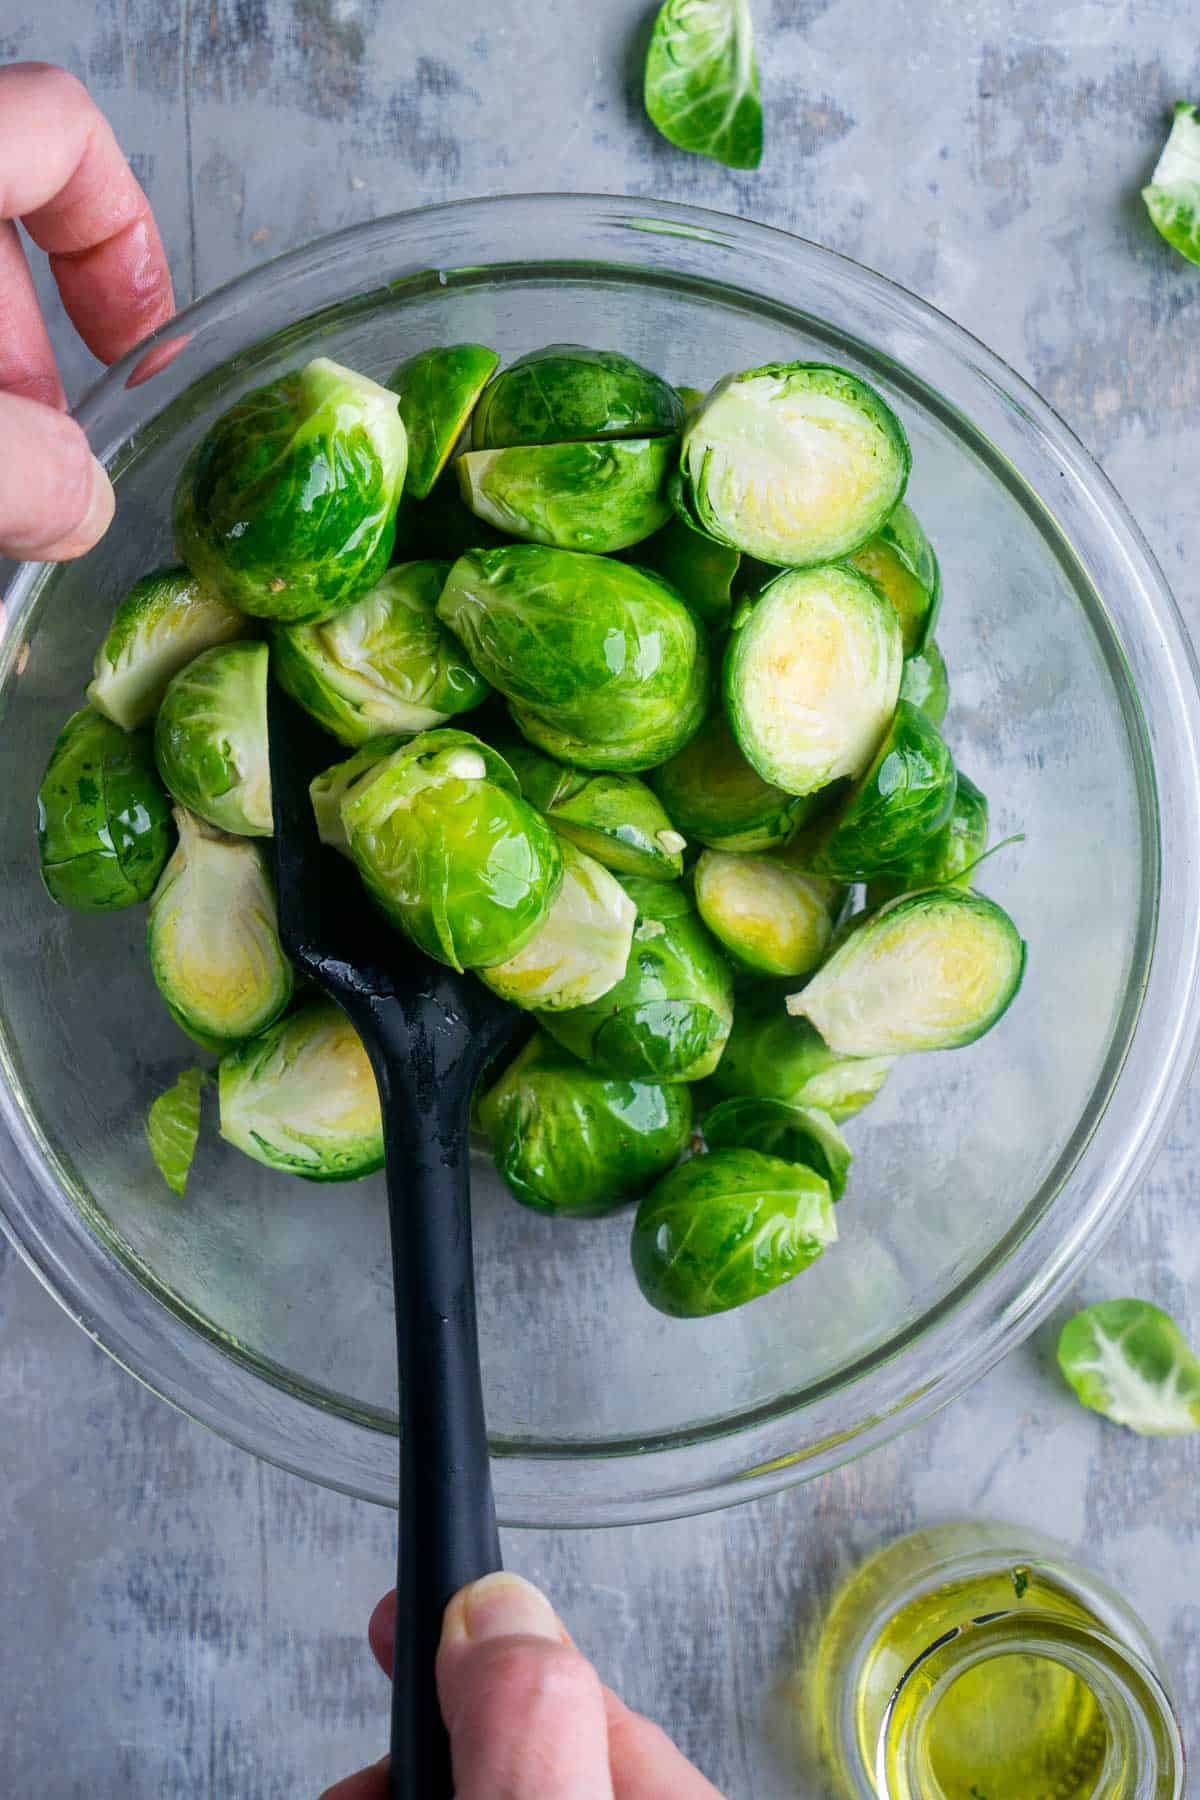 Tossing Brussels sprouts with oil in glass mixing bowl